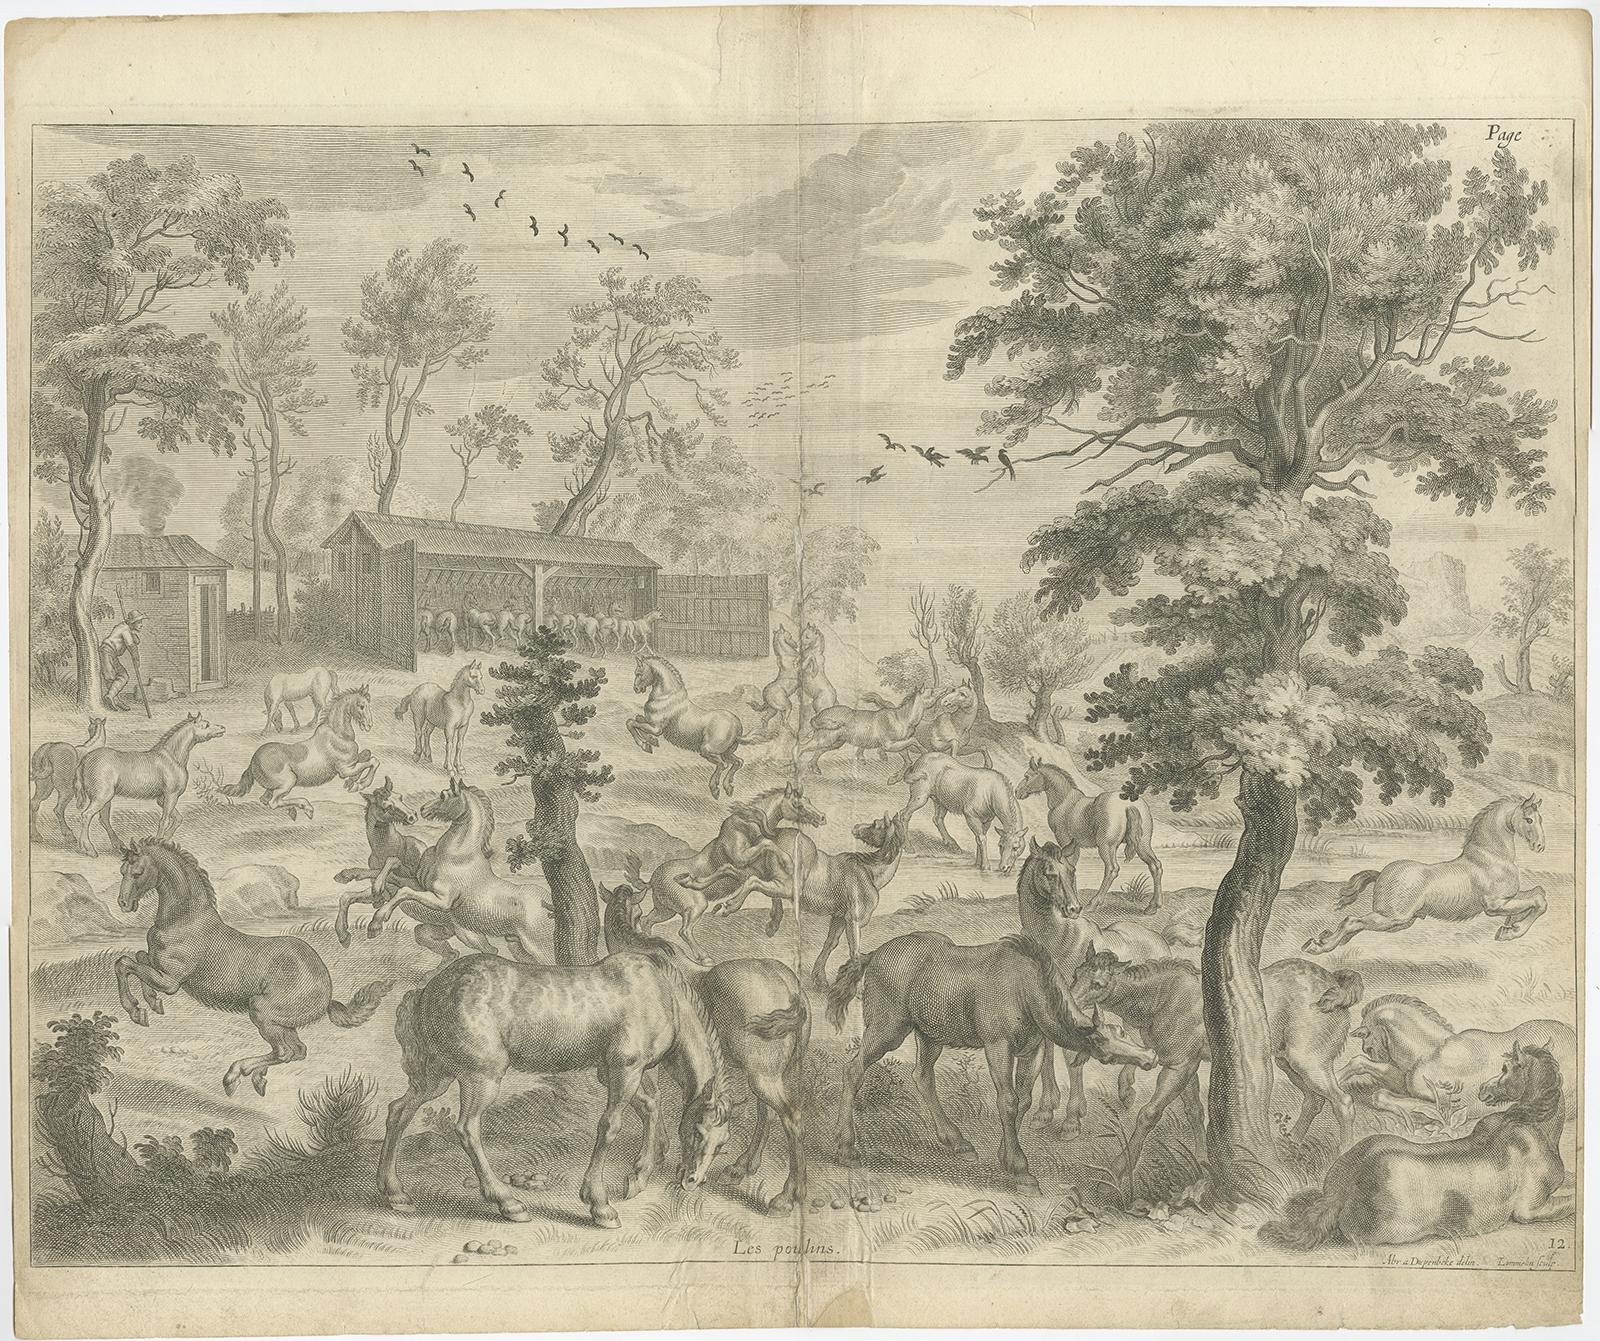 Antique horse print titled 'Les Poulins'. This print depicts a study of young horses. Source unknown, to be determined.

Artists and Engravers: By A. Lommelin after A. van Diepenbeeck.